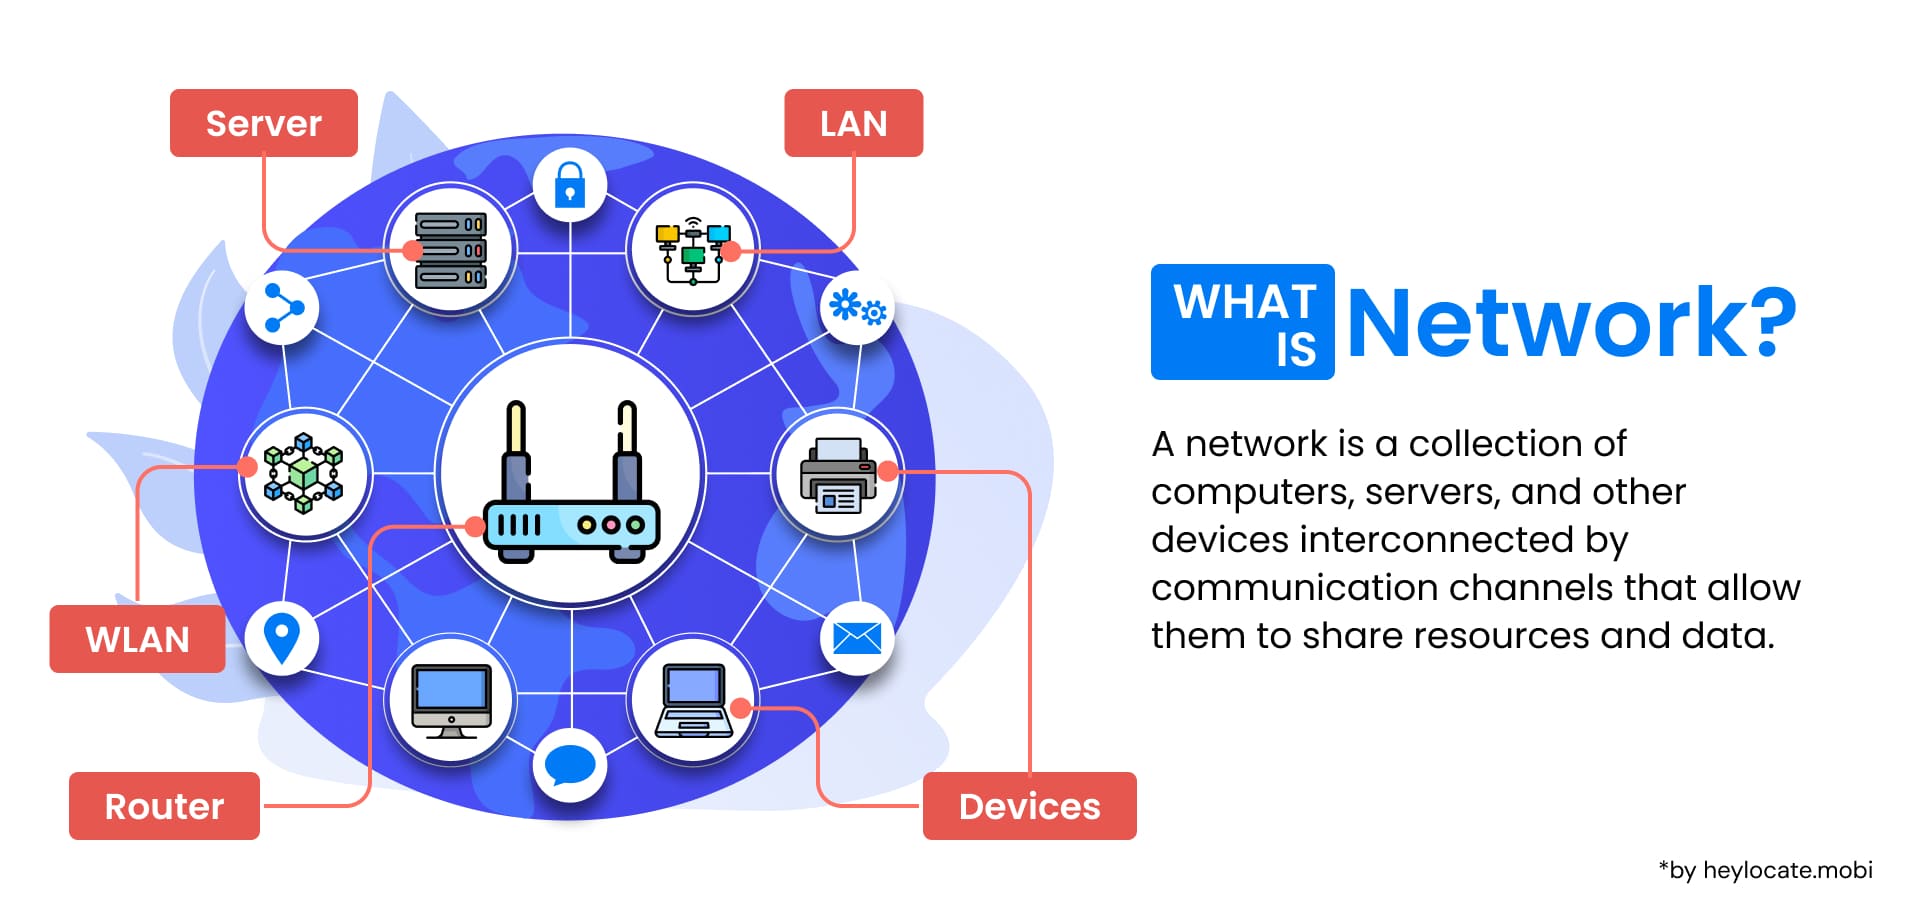 An illustrative look of what a network is, how different components come together to form a network, showcasing connections between servers, routers, WLANs, LANs, and various devices.